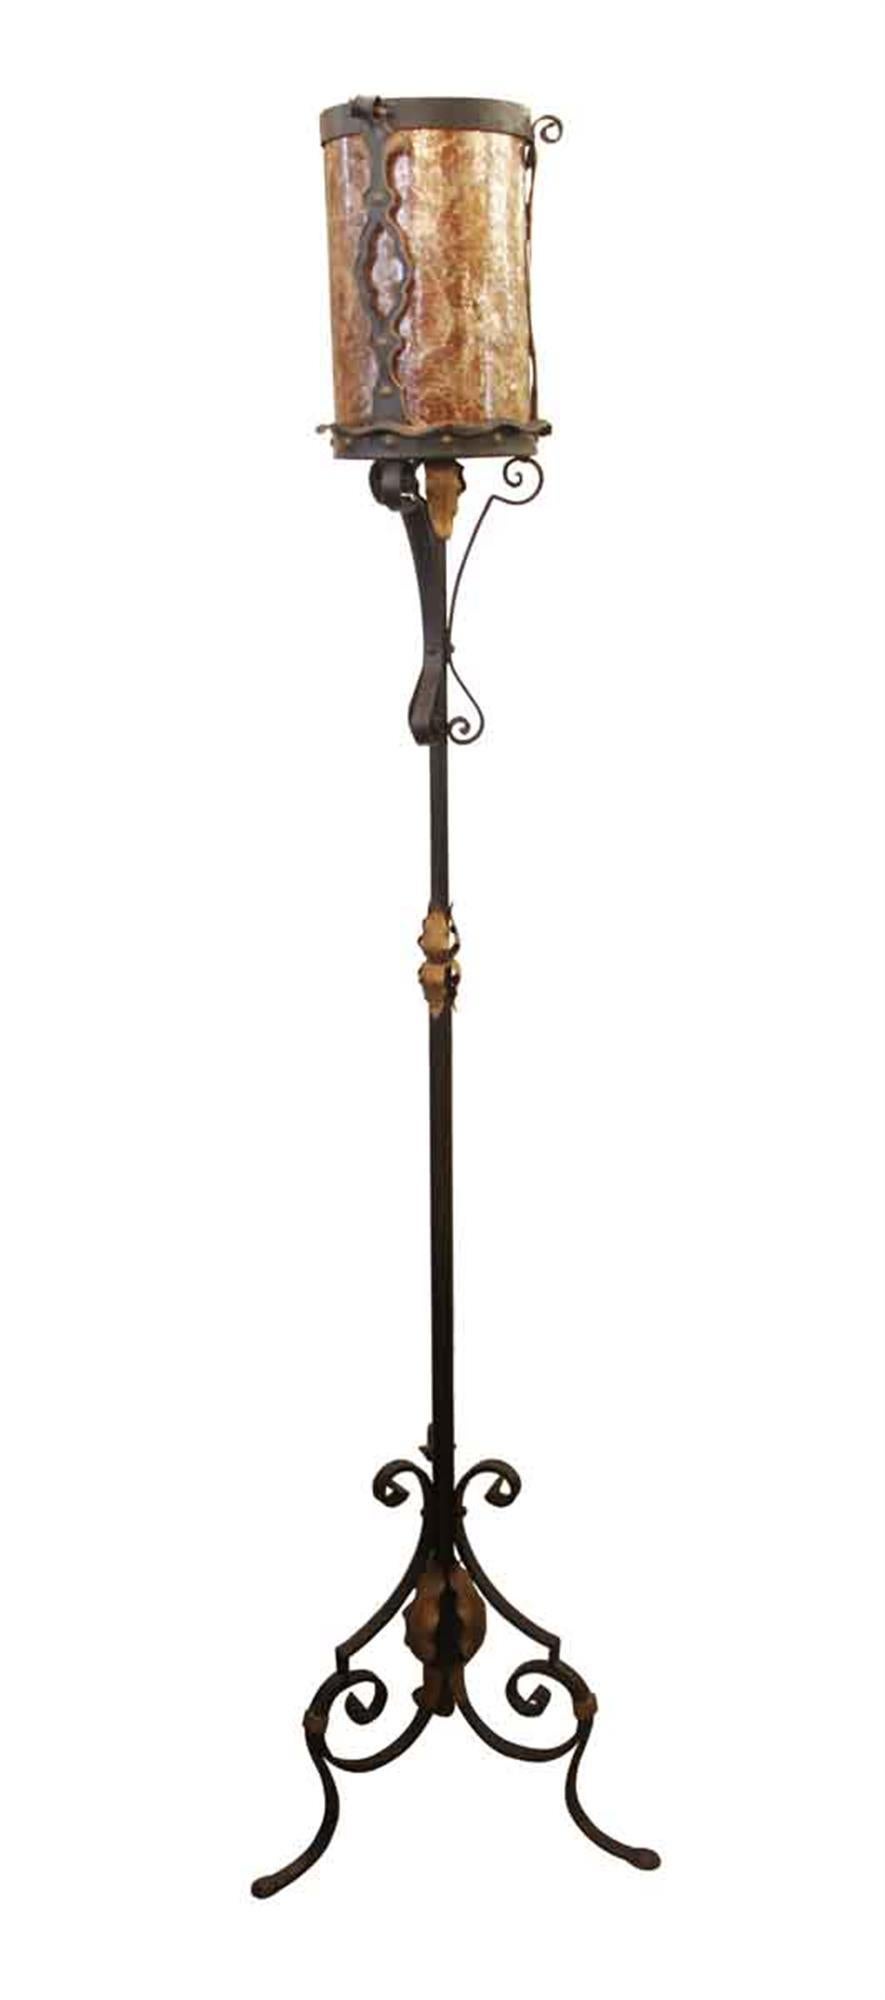 1910s Arts & Crafts style hammered and pinned wrought iron floor lamp with a reddish brown mica shade. The shade is removable. This can be seen at our 2420 Broadway location on the upper west side in Manhattan.